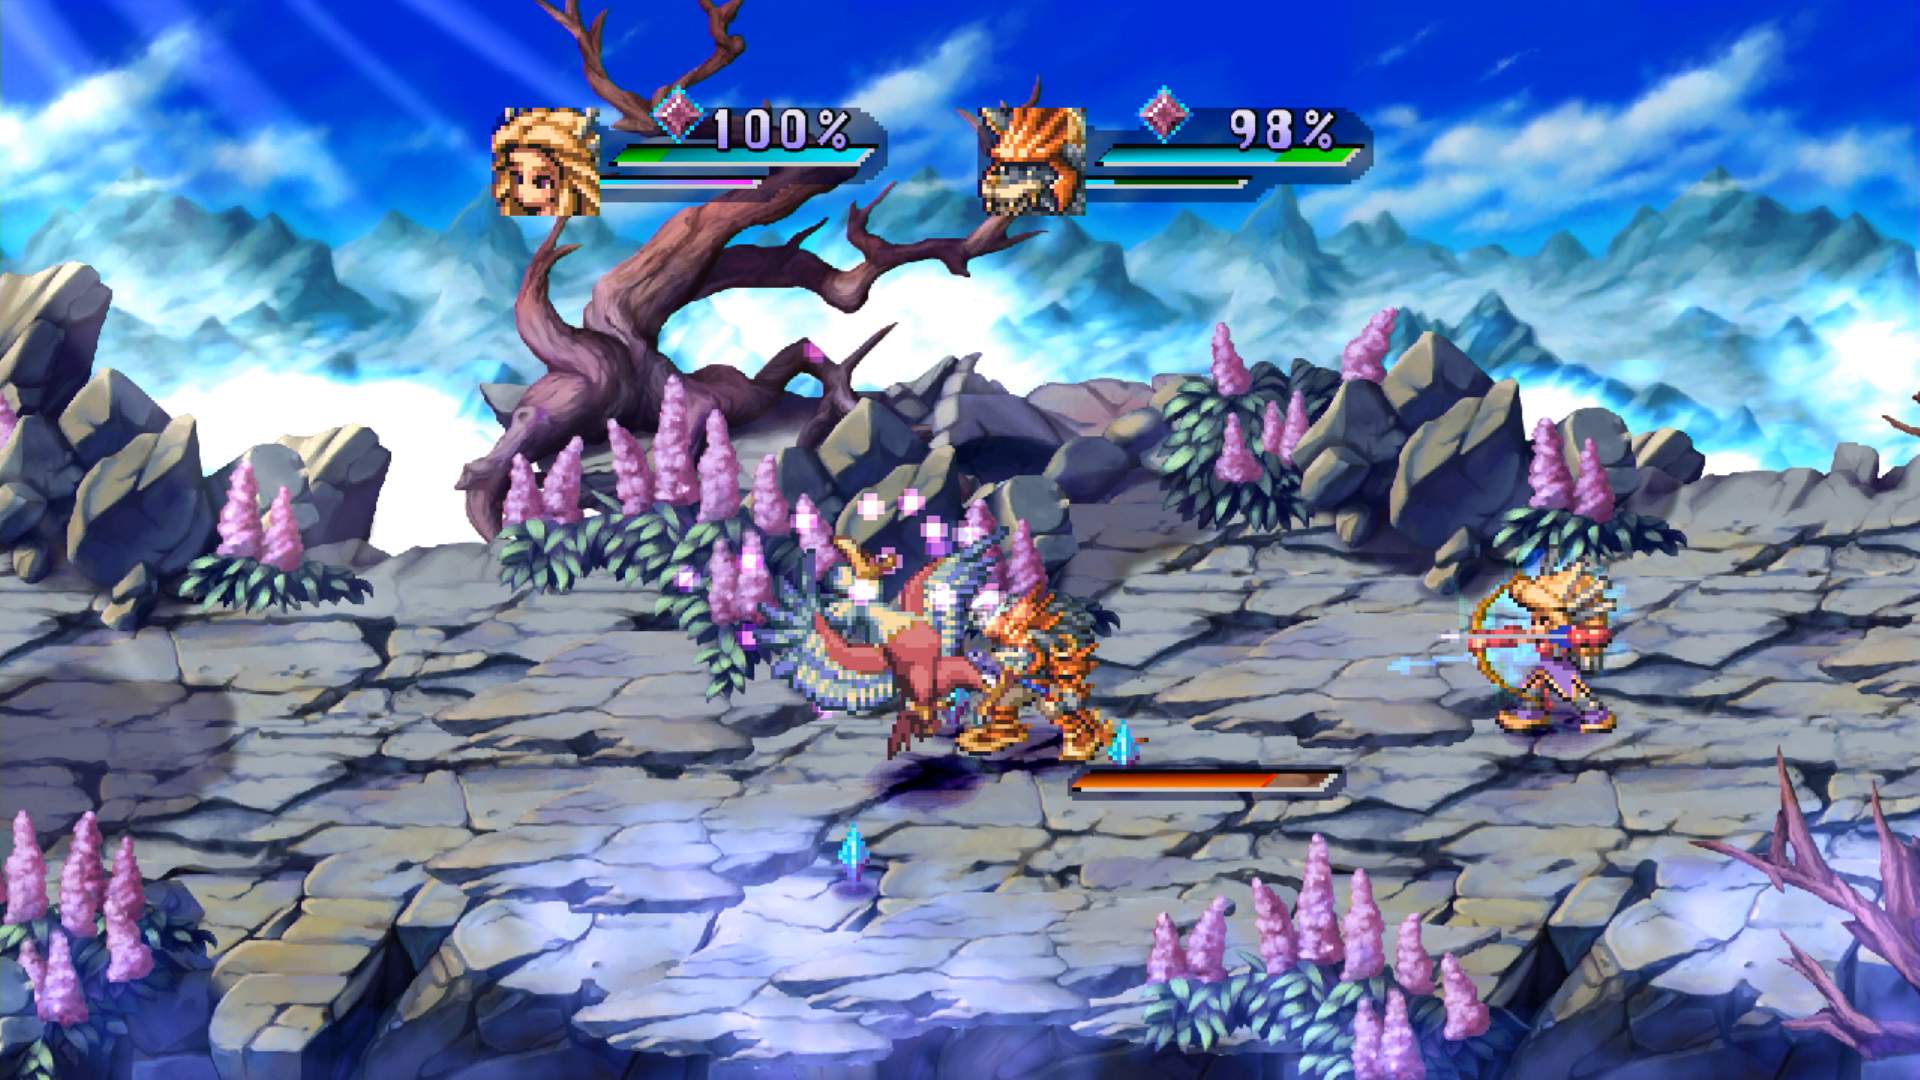 Legend of Mana In-game battle screen showing the party facing off against a monster in an open landscape